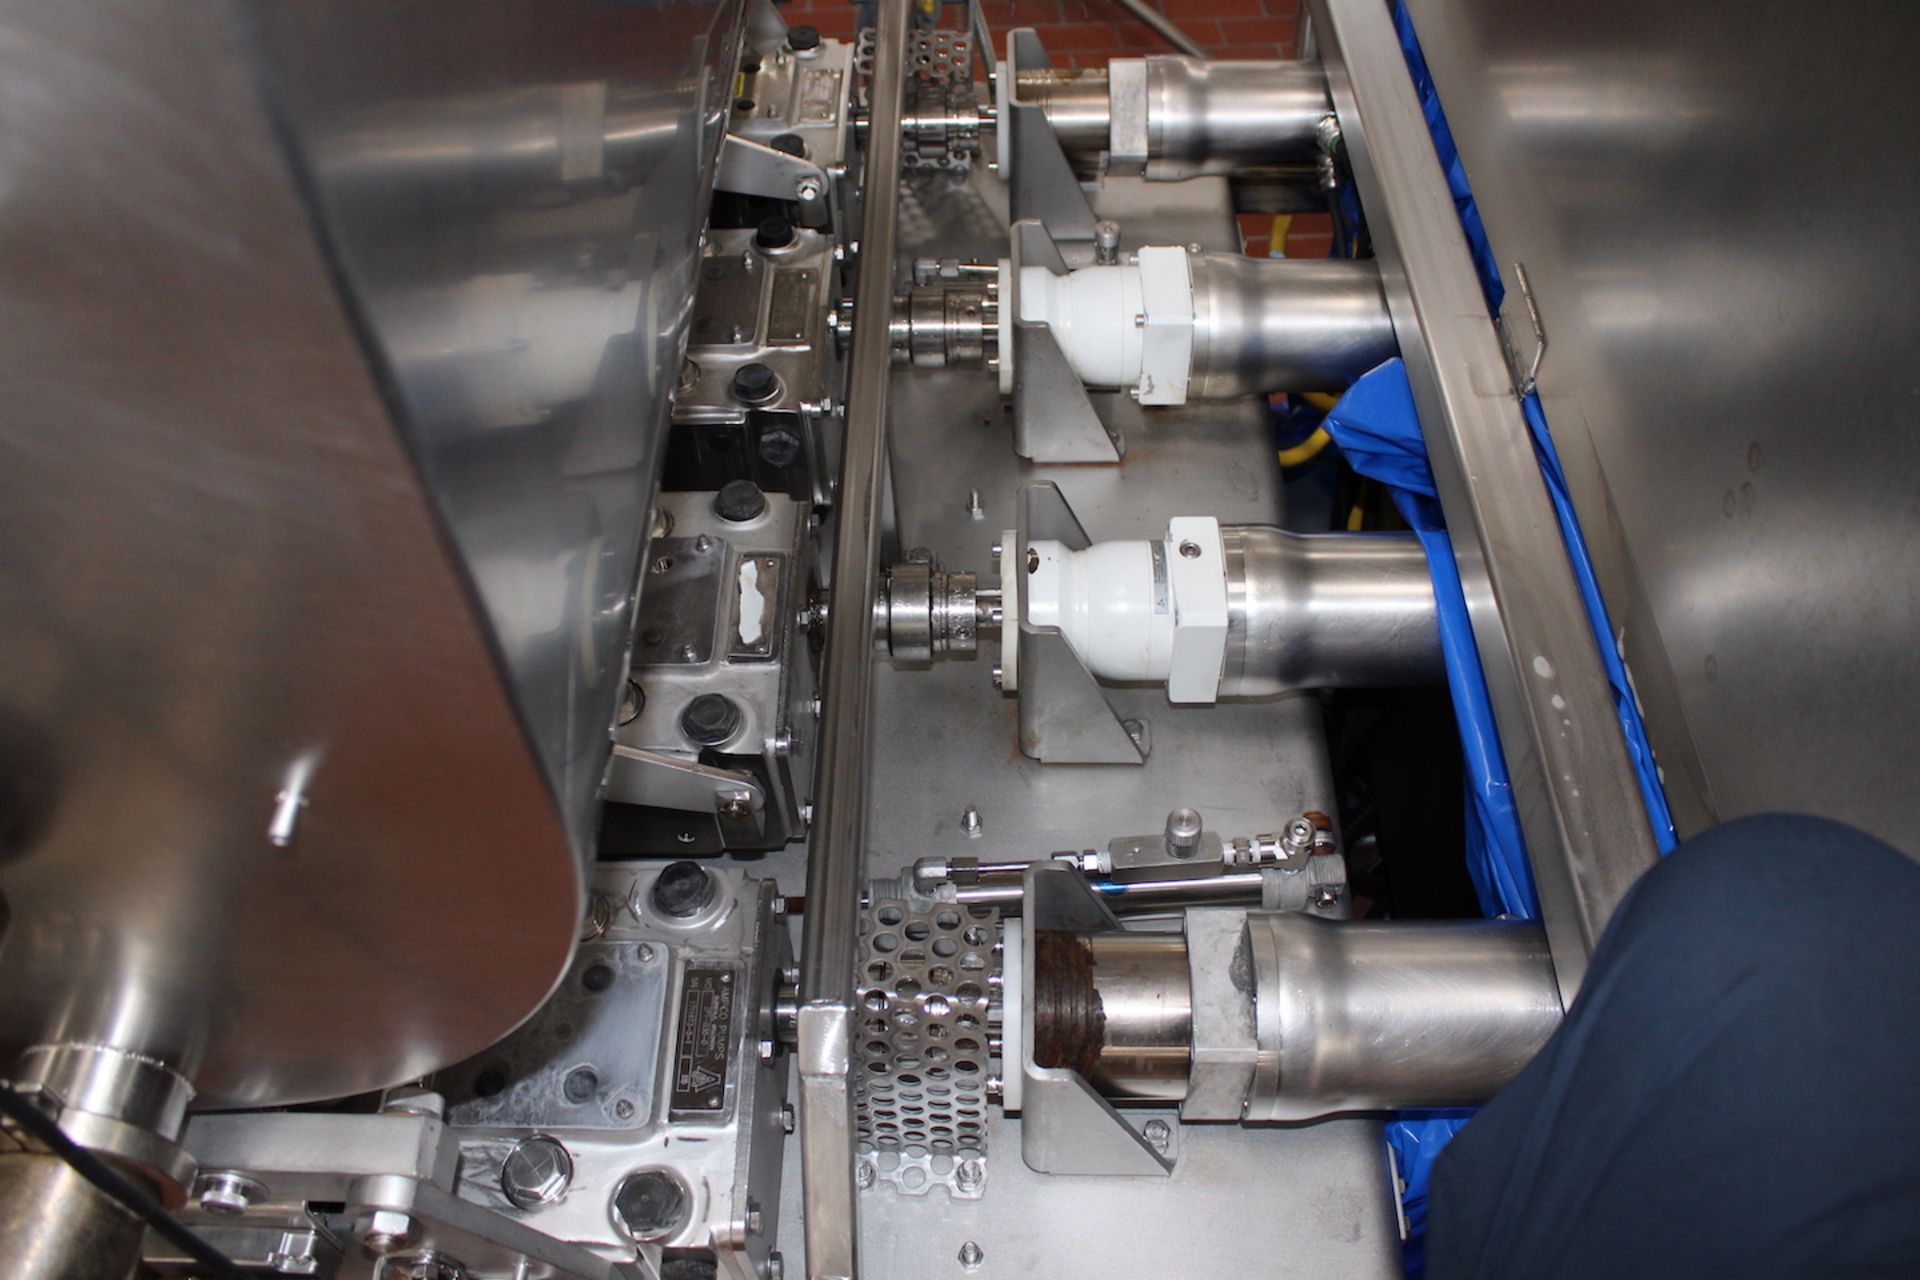 HINDS-BOCK 4-HEAD DEPOSITOR / FILLER, WITH (4) AMPCO POSITIVE DISPLACEMENT PUMPS, MODEL 030 - Image 5 of 6